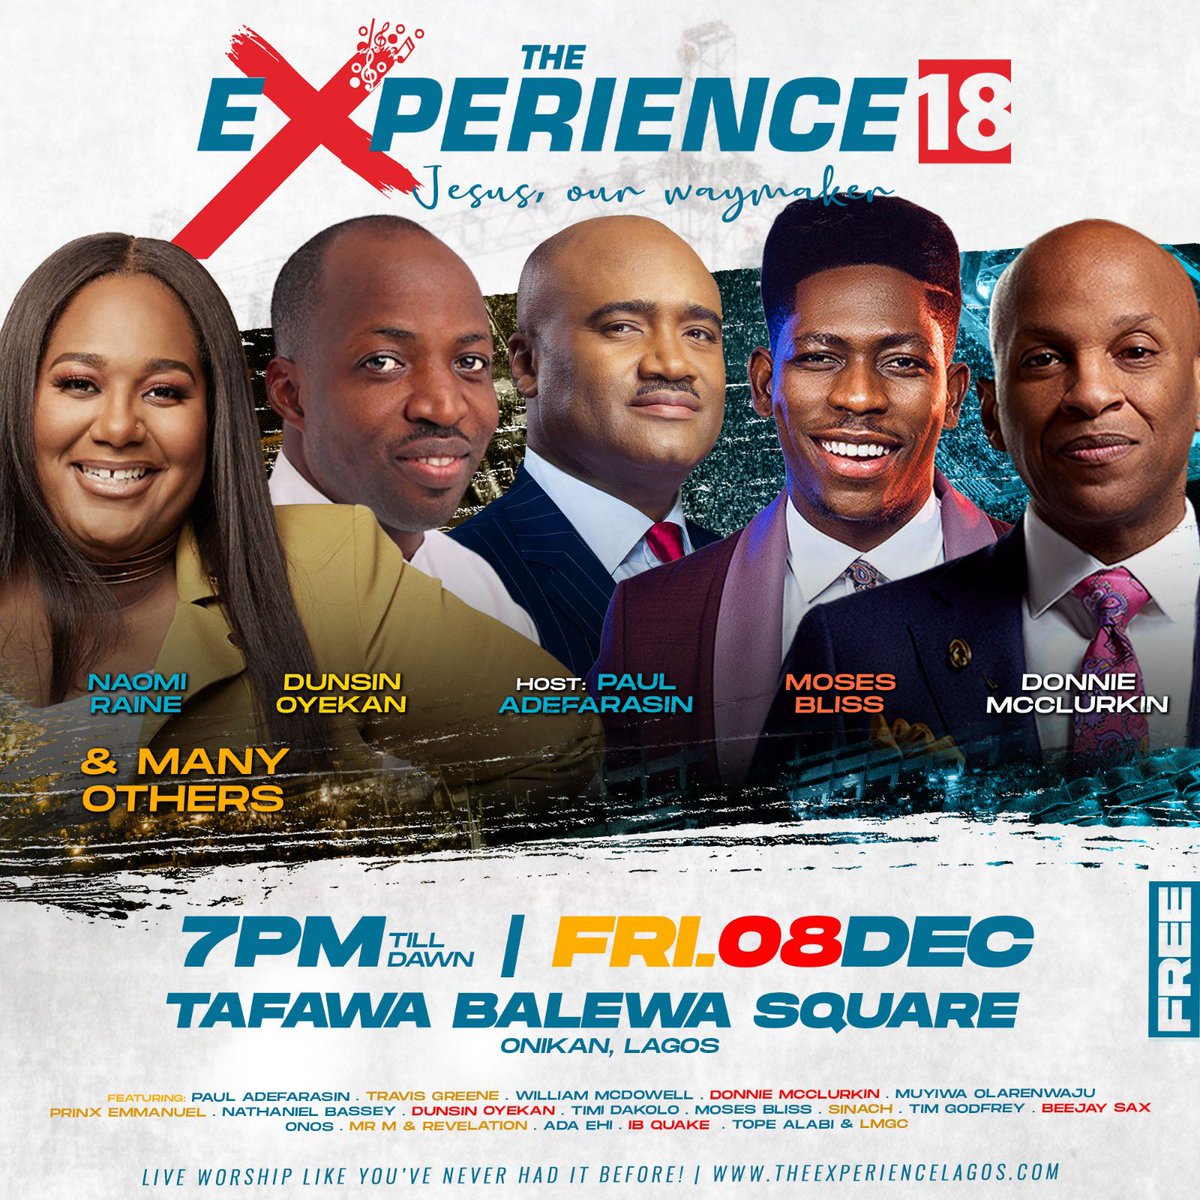 #TheExperience is better experienced than told. Make plans to attend. Venue is Tafawa Balewa Square, the date is the 8th of December, and the time is 7pm till dawn! Tell a friend to tell a friend! #TE18 #JesusOurWayMaker